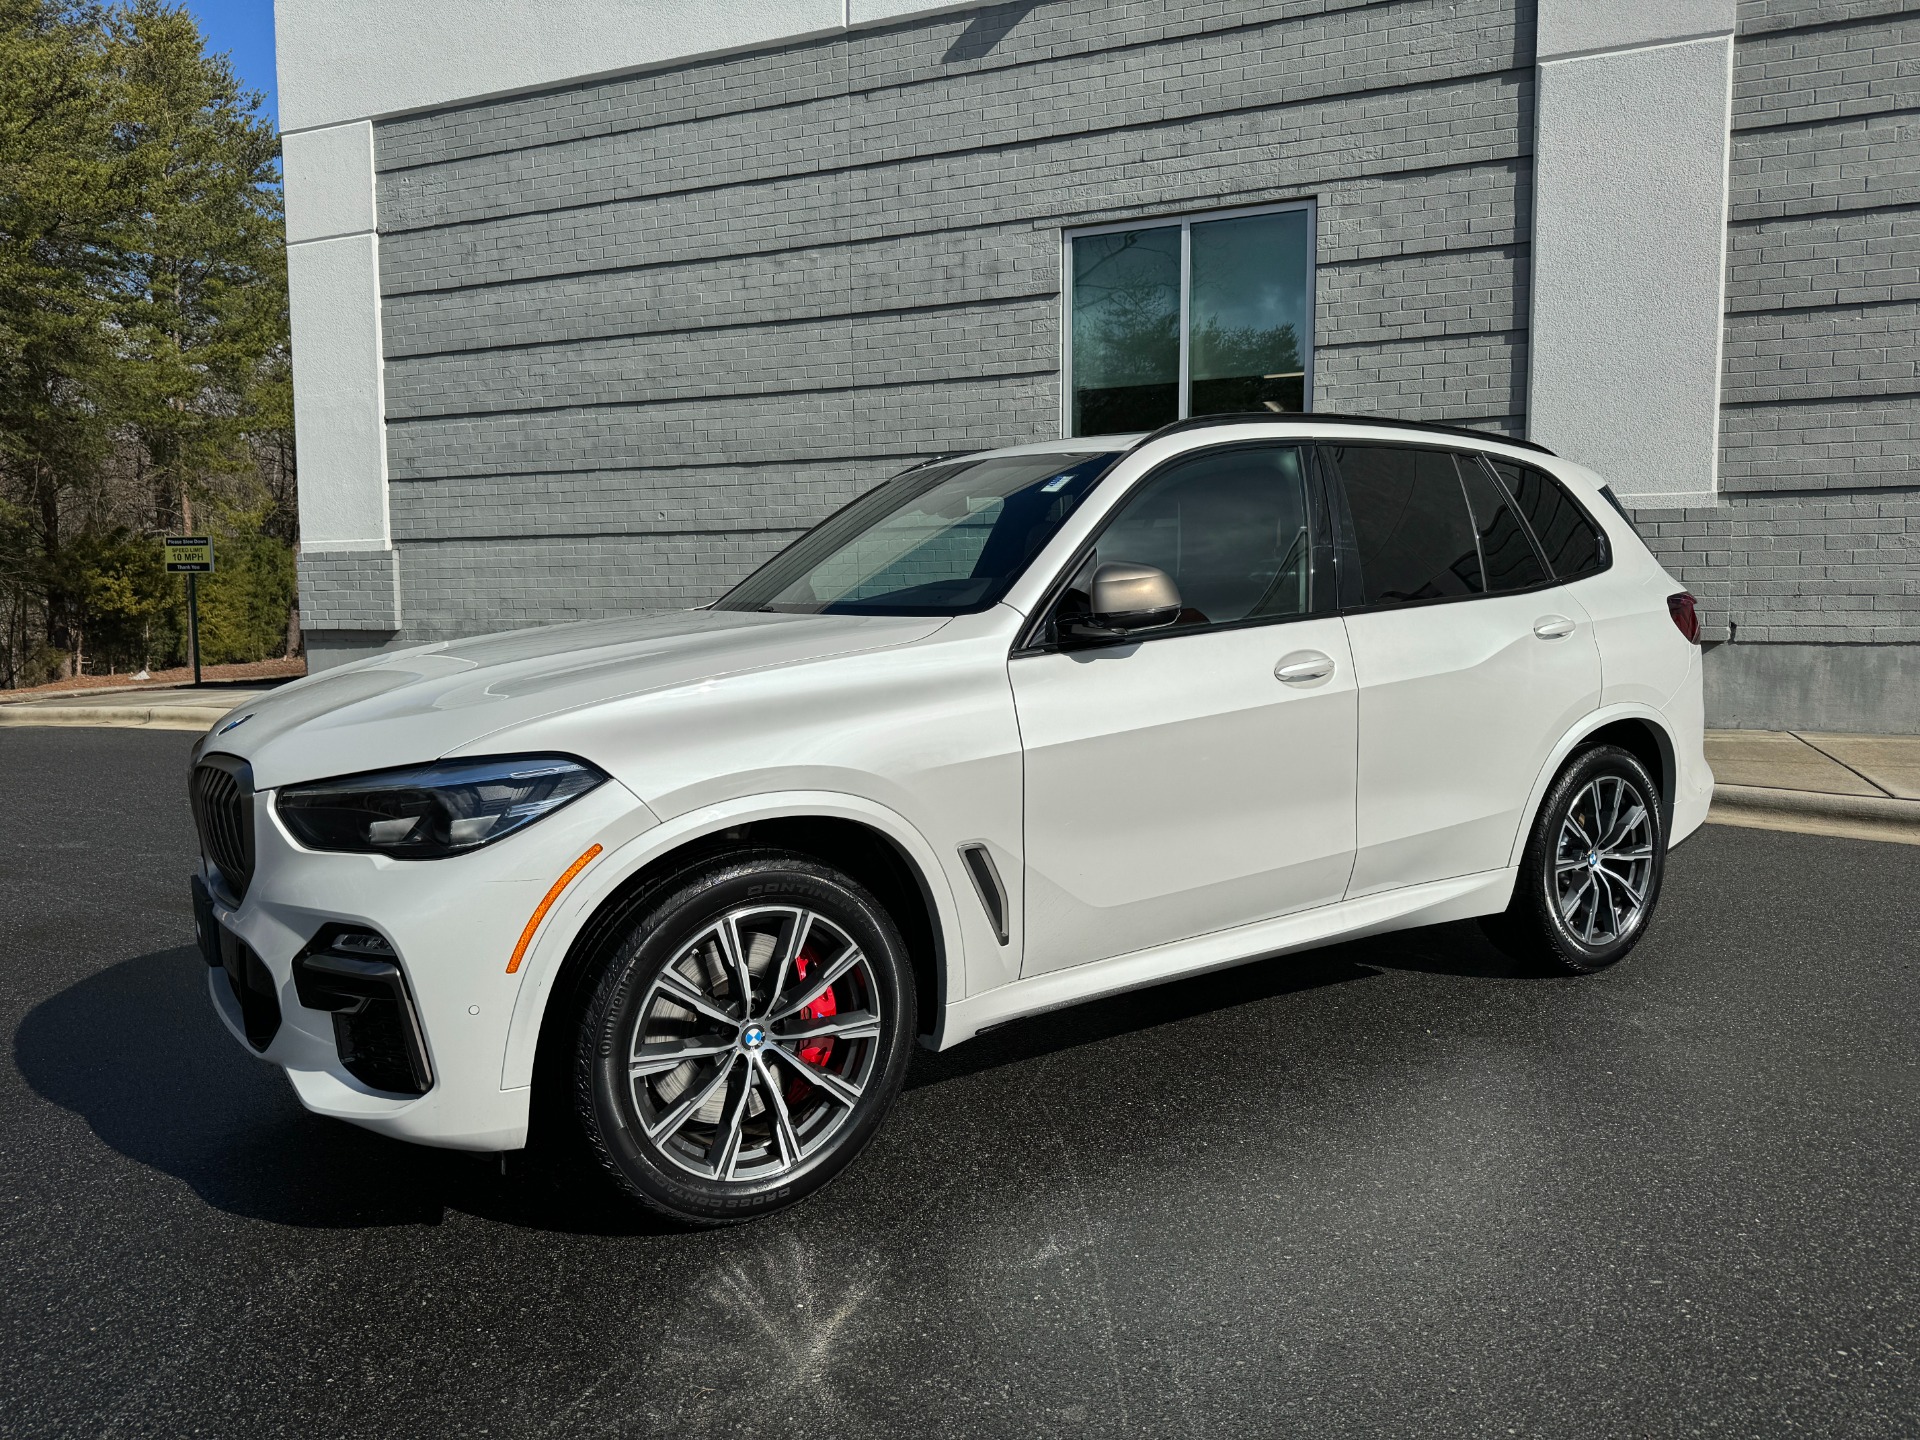 Used 2021 BMW X5 M50i AIR SUSPENSION / COGNAC LEATHER for sale $55,000 at Formula Imports in Charlotte NC 28227 2